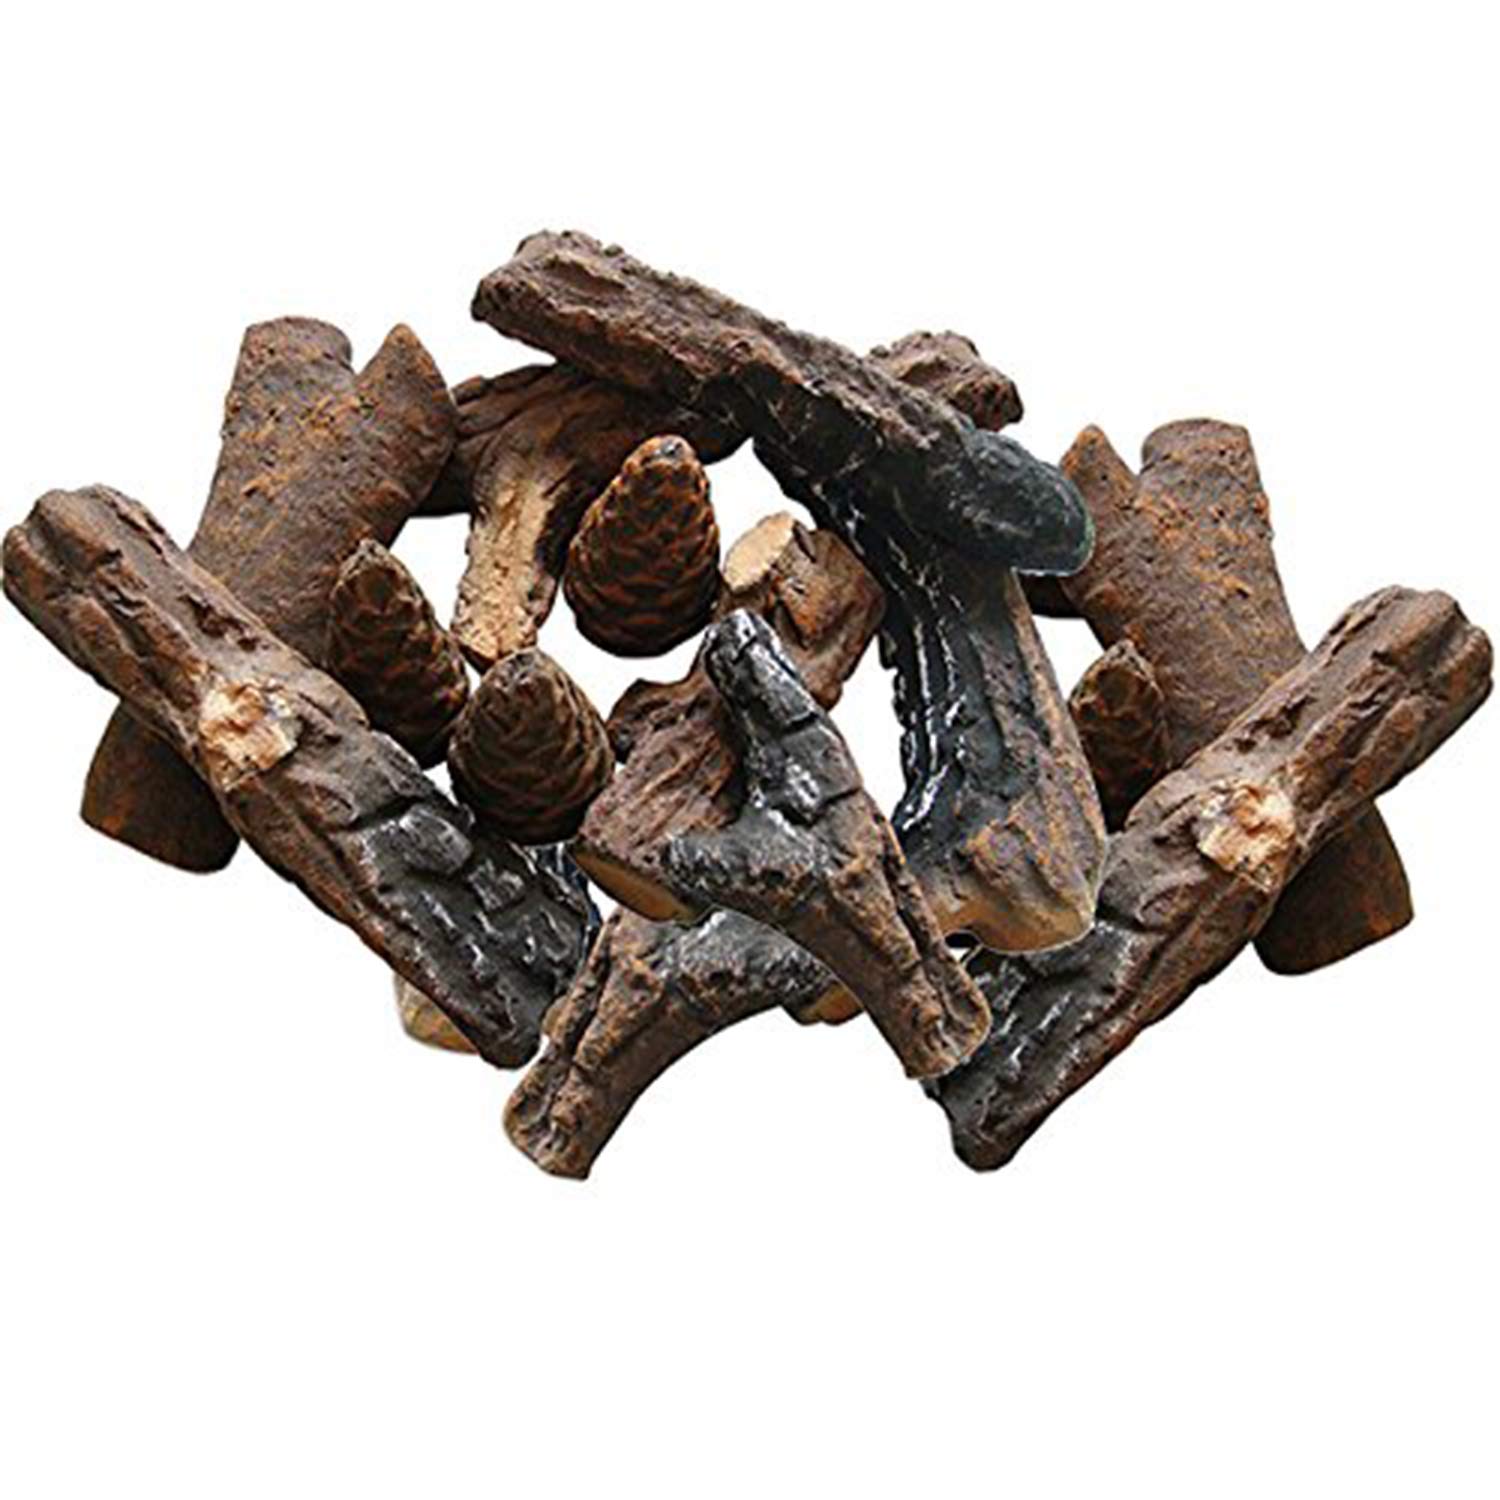 Regal Flame 9 Piece Petite Set of Ceramic Wood Gas Fireplace Logs Logs for All Types of Indoor, Gas Inserts, Ventless & Vent Fre